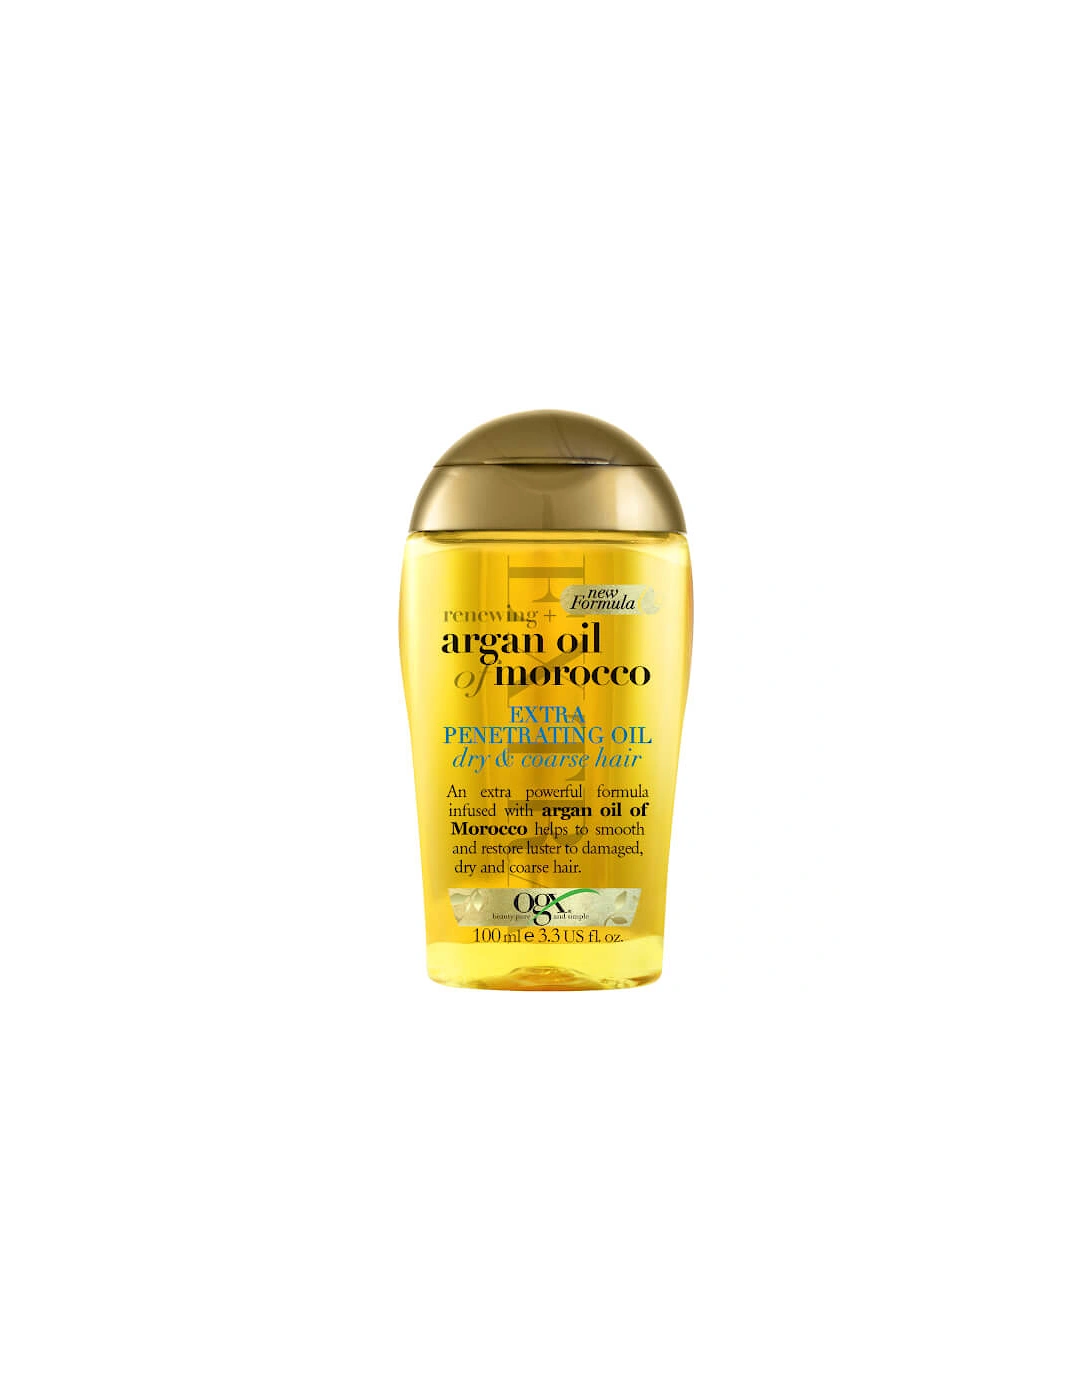 Renewing+ Argan Oil of Morocco Extra Penetrating Oil 100ml, 2 of 1